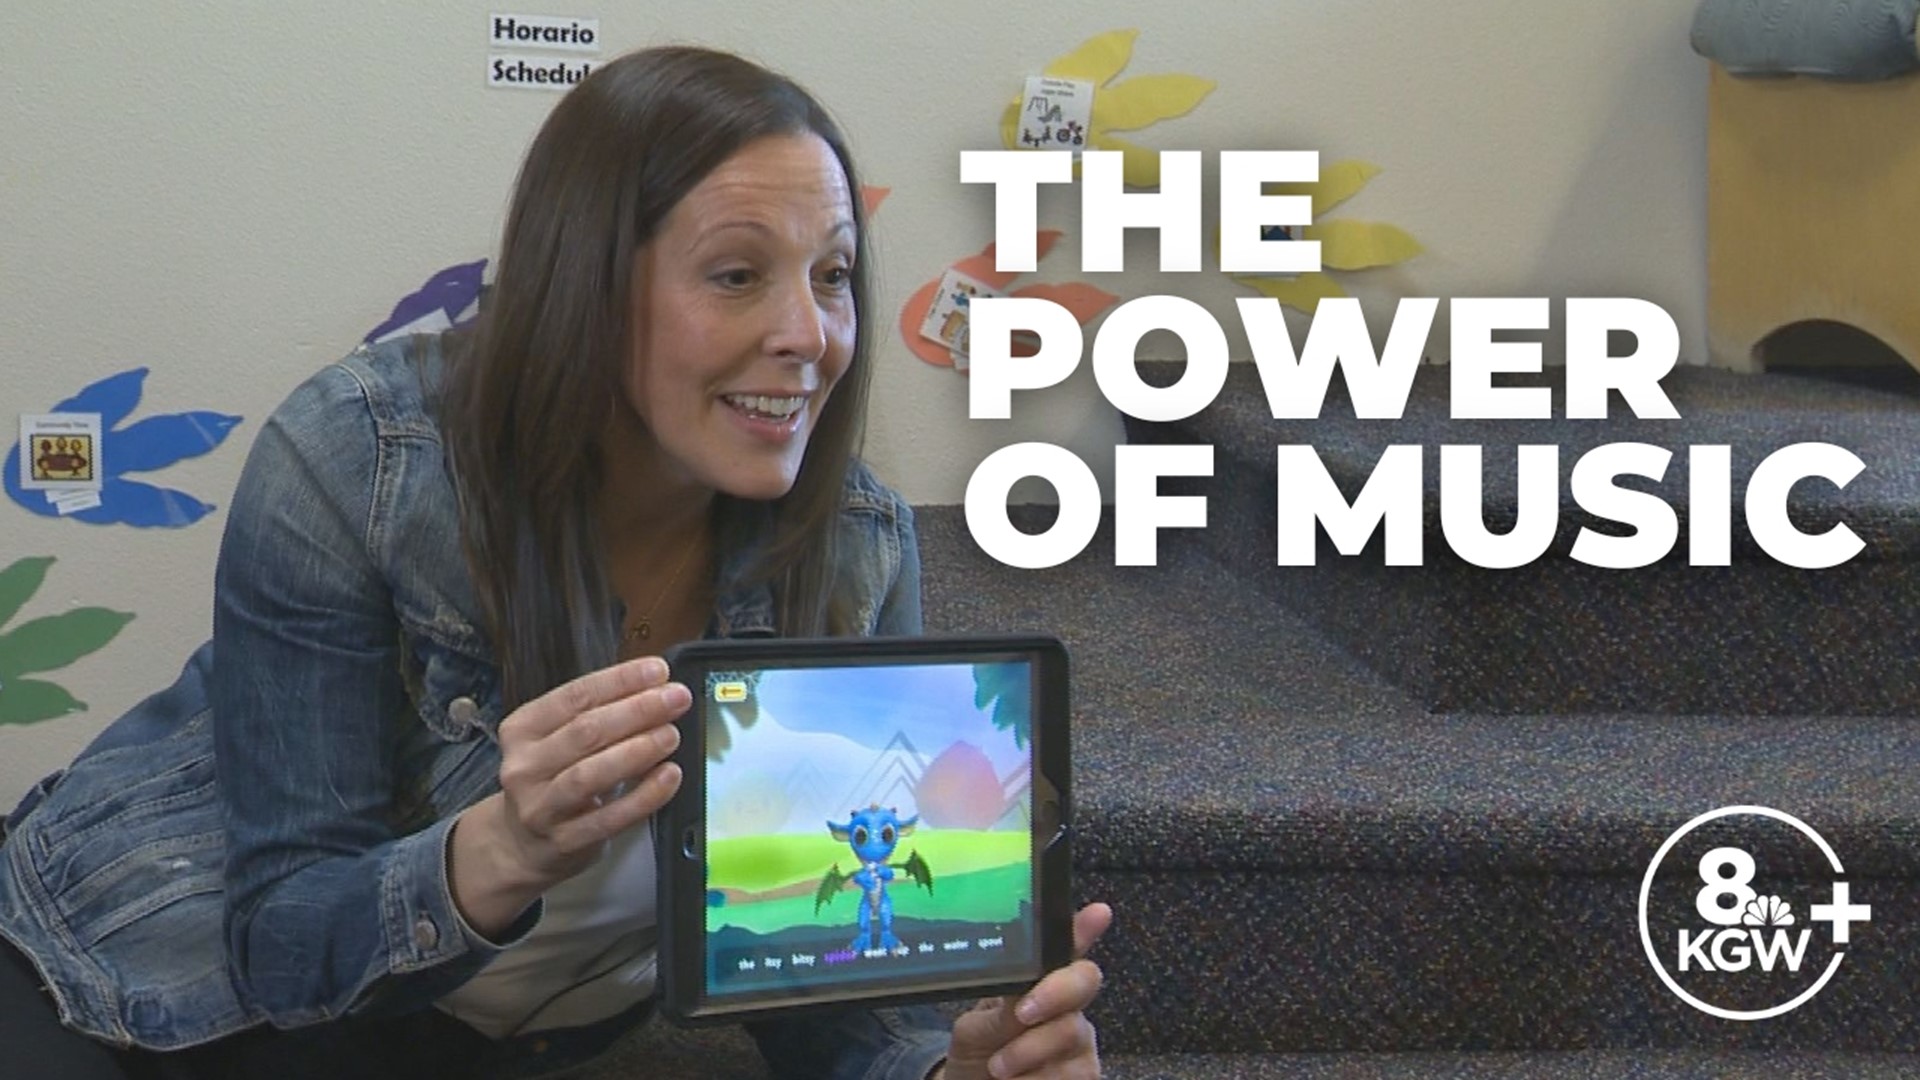 As a special education teacher, Emily Cadiz suffered a severe brain injury. Music helped her re-learn what she'd lost, a gift she now shares with young kids.